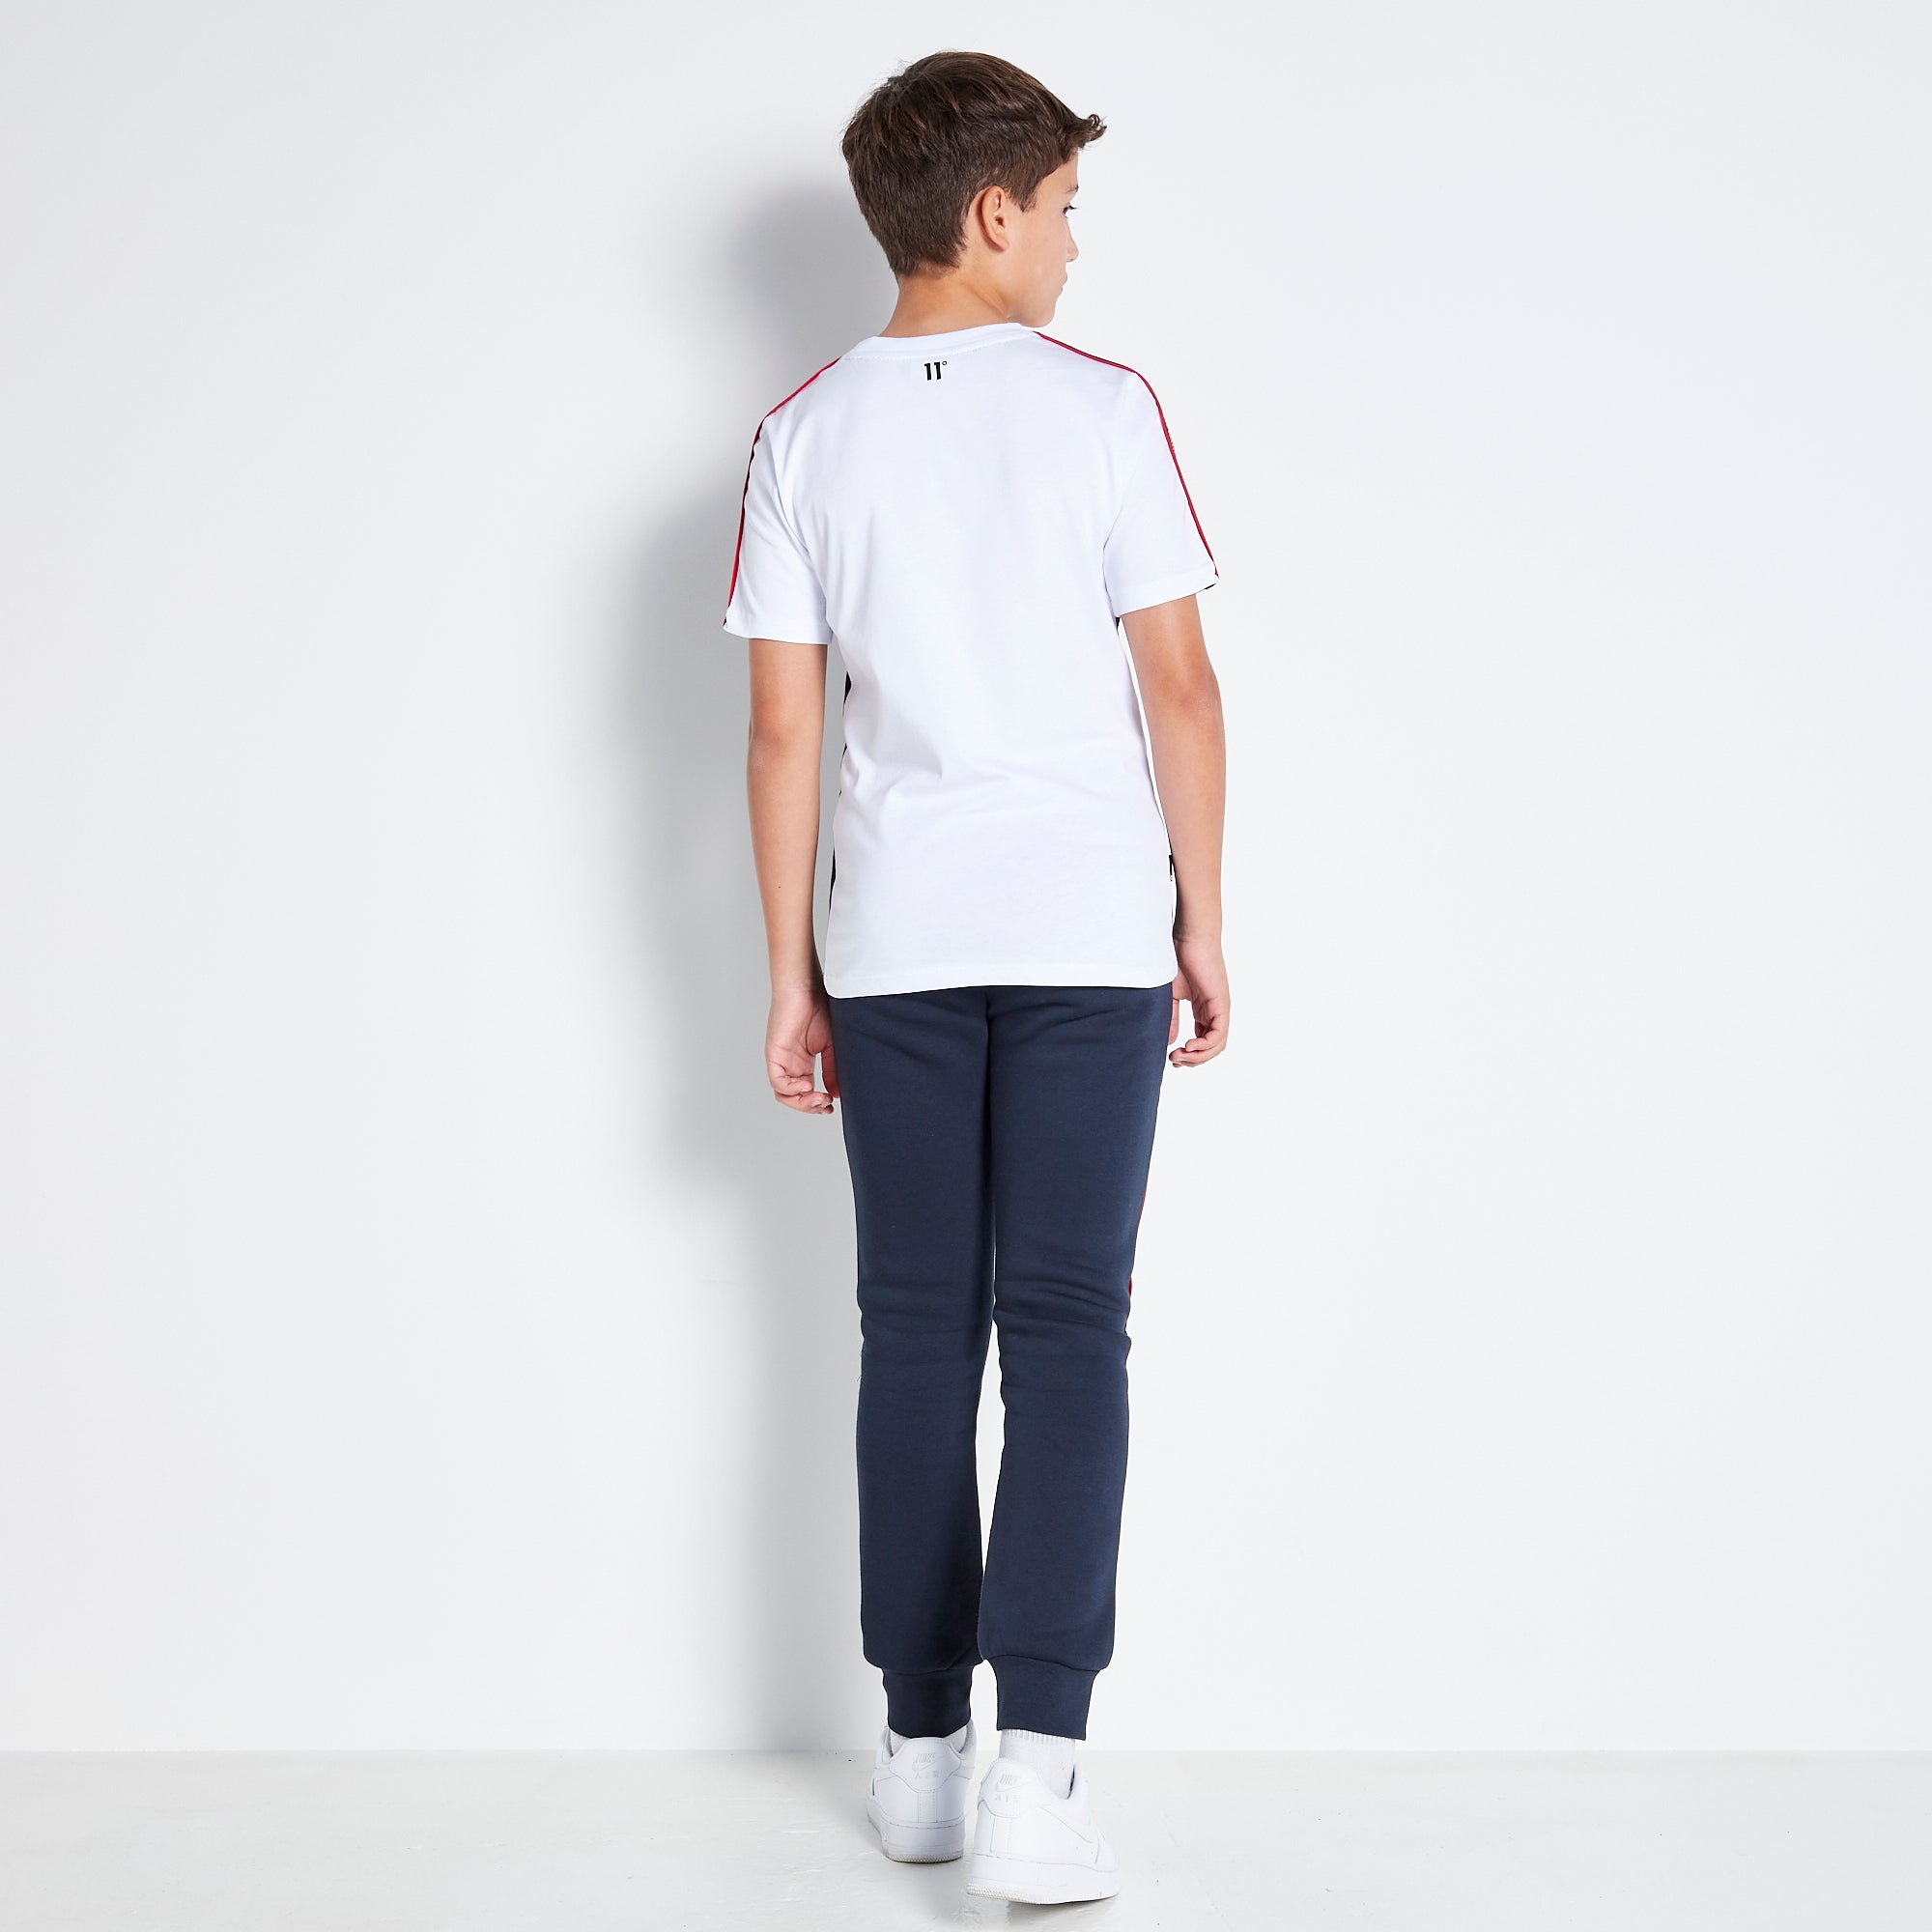 Colour Block Taped Boys T-Shirt - Navy / White-Back view